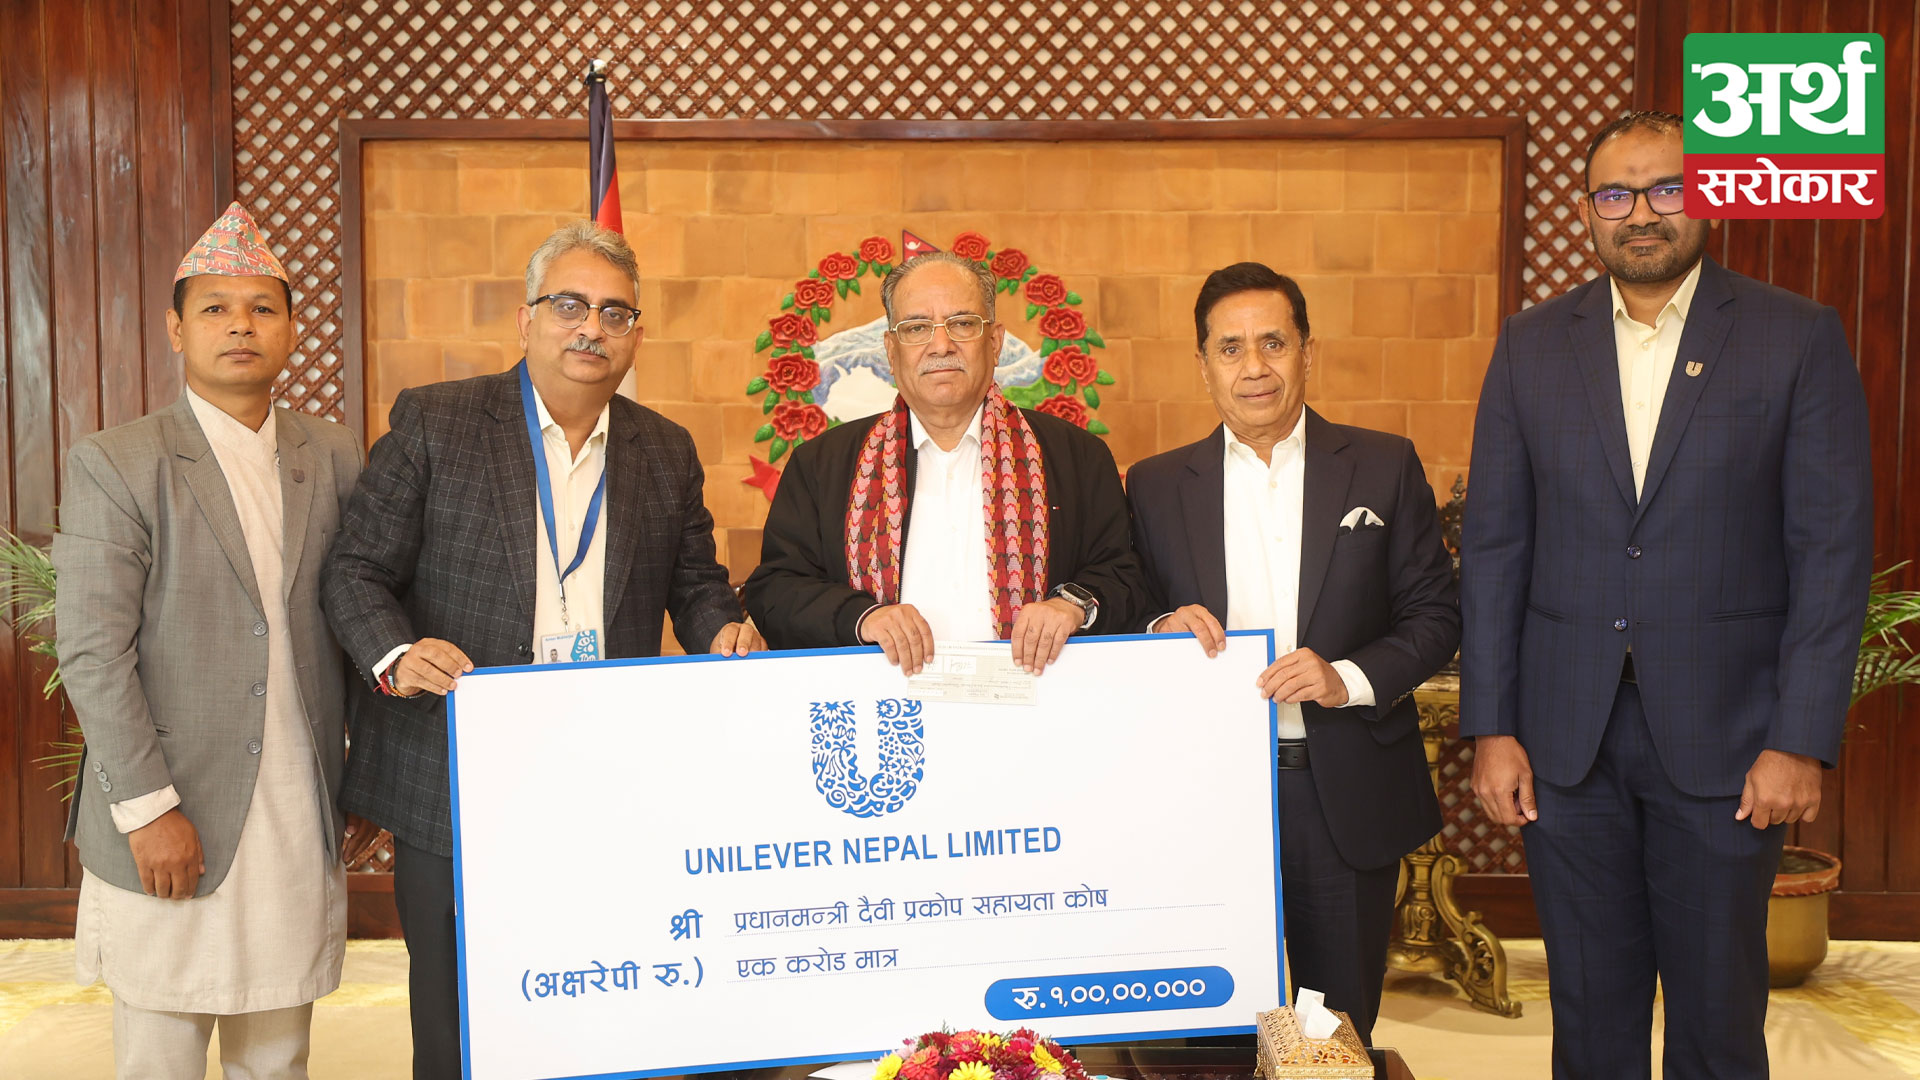 Unilever Nepal provides aid to Disaster Struck Community with relief materials and fund